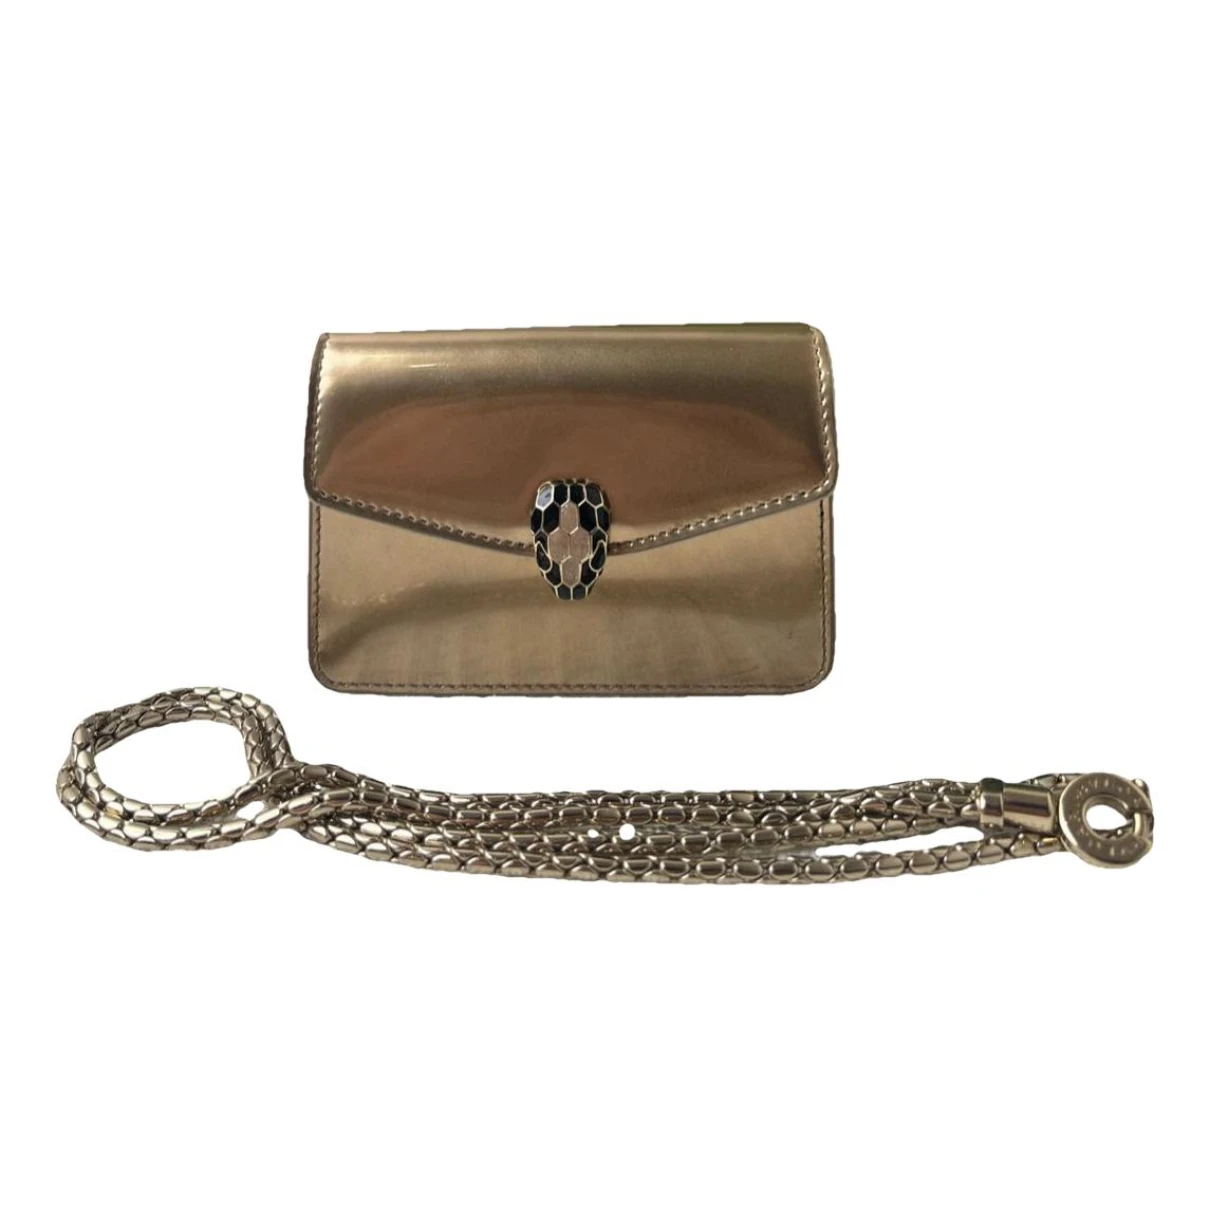 Pre-owned Bvlgari Serpenti Patent Leather Crossbody Bag In Gold